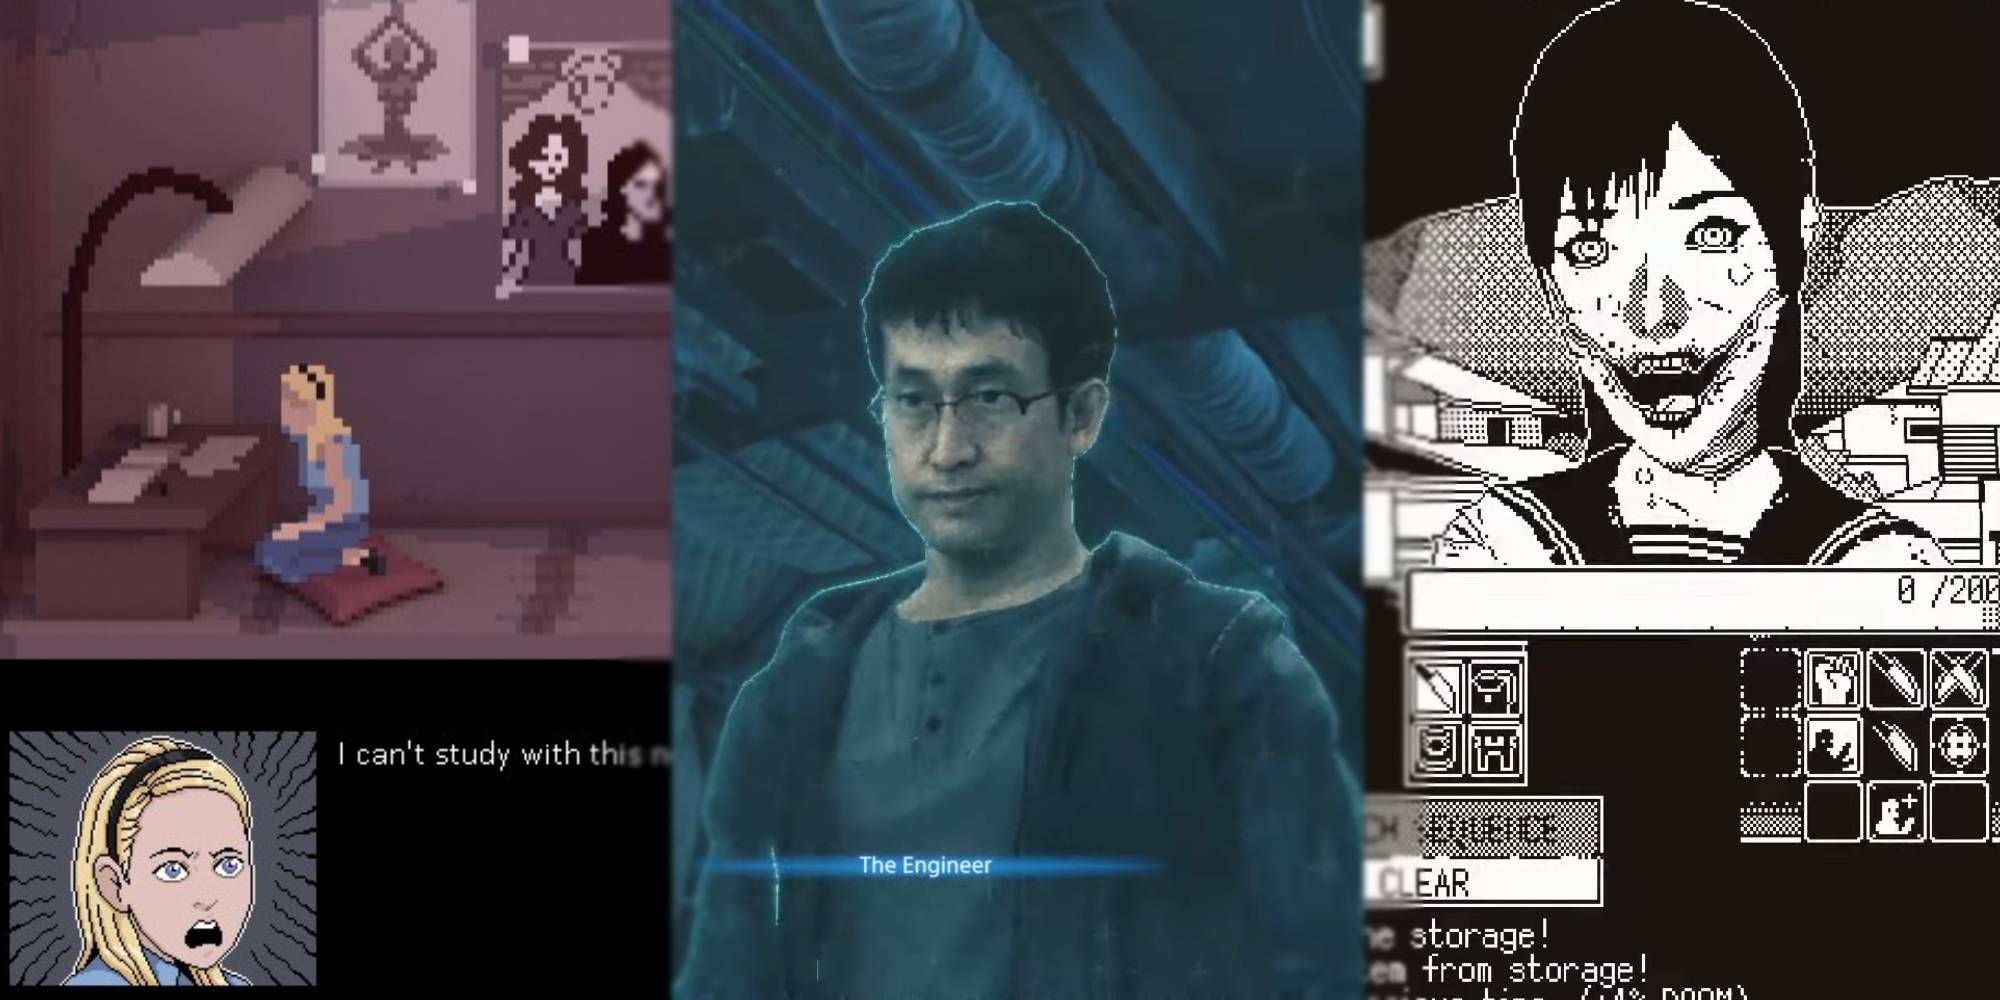 5 must-play horror titles that were inspired by Junji Ito's works